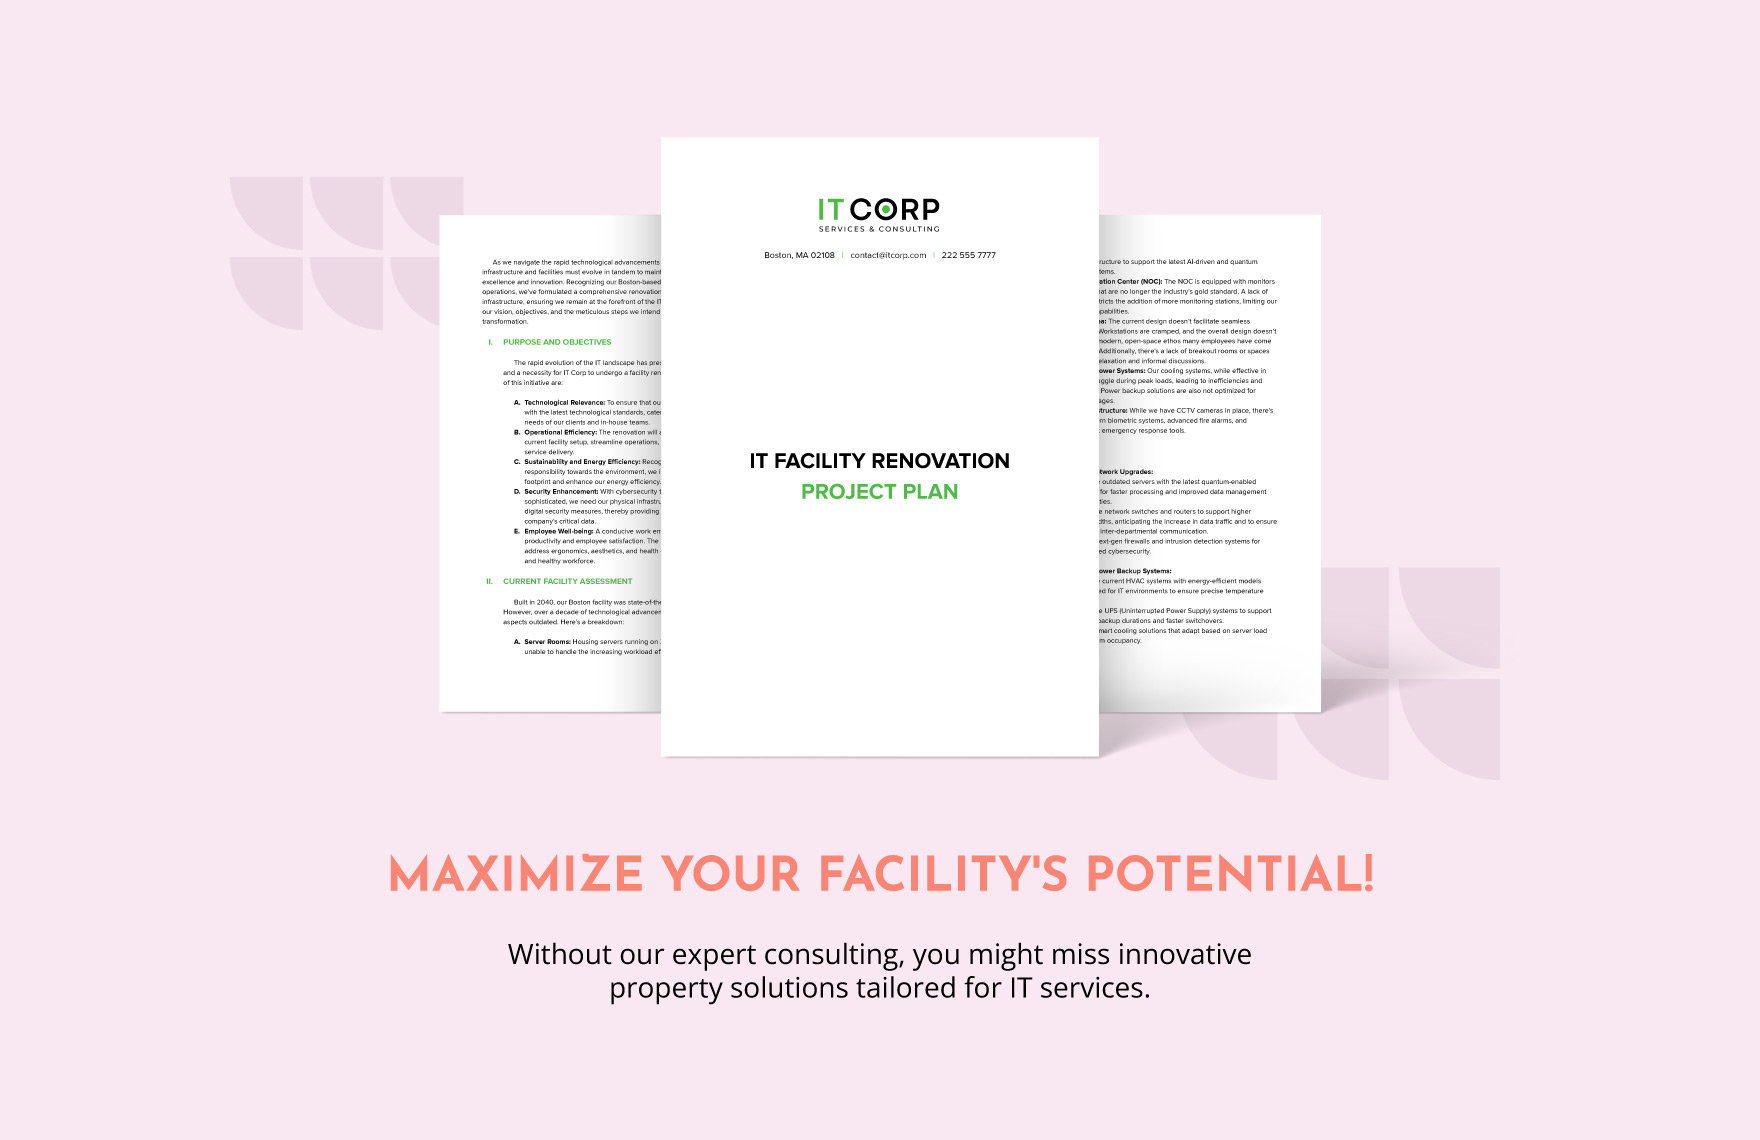 IT Facility Renovation Project Plan Template